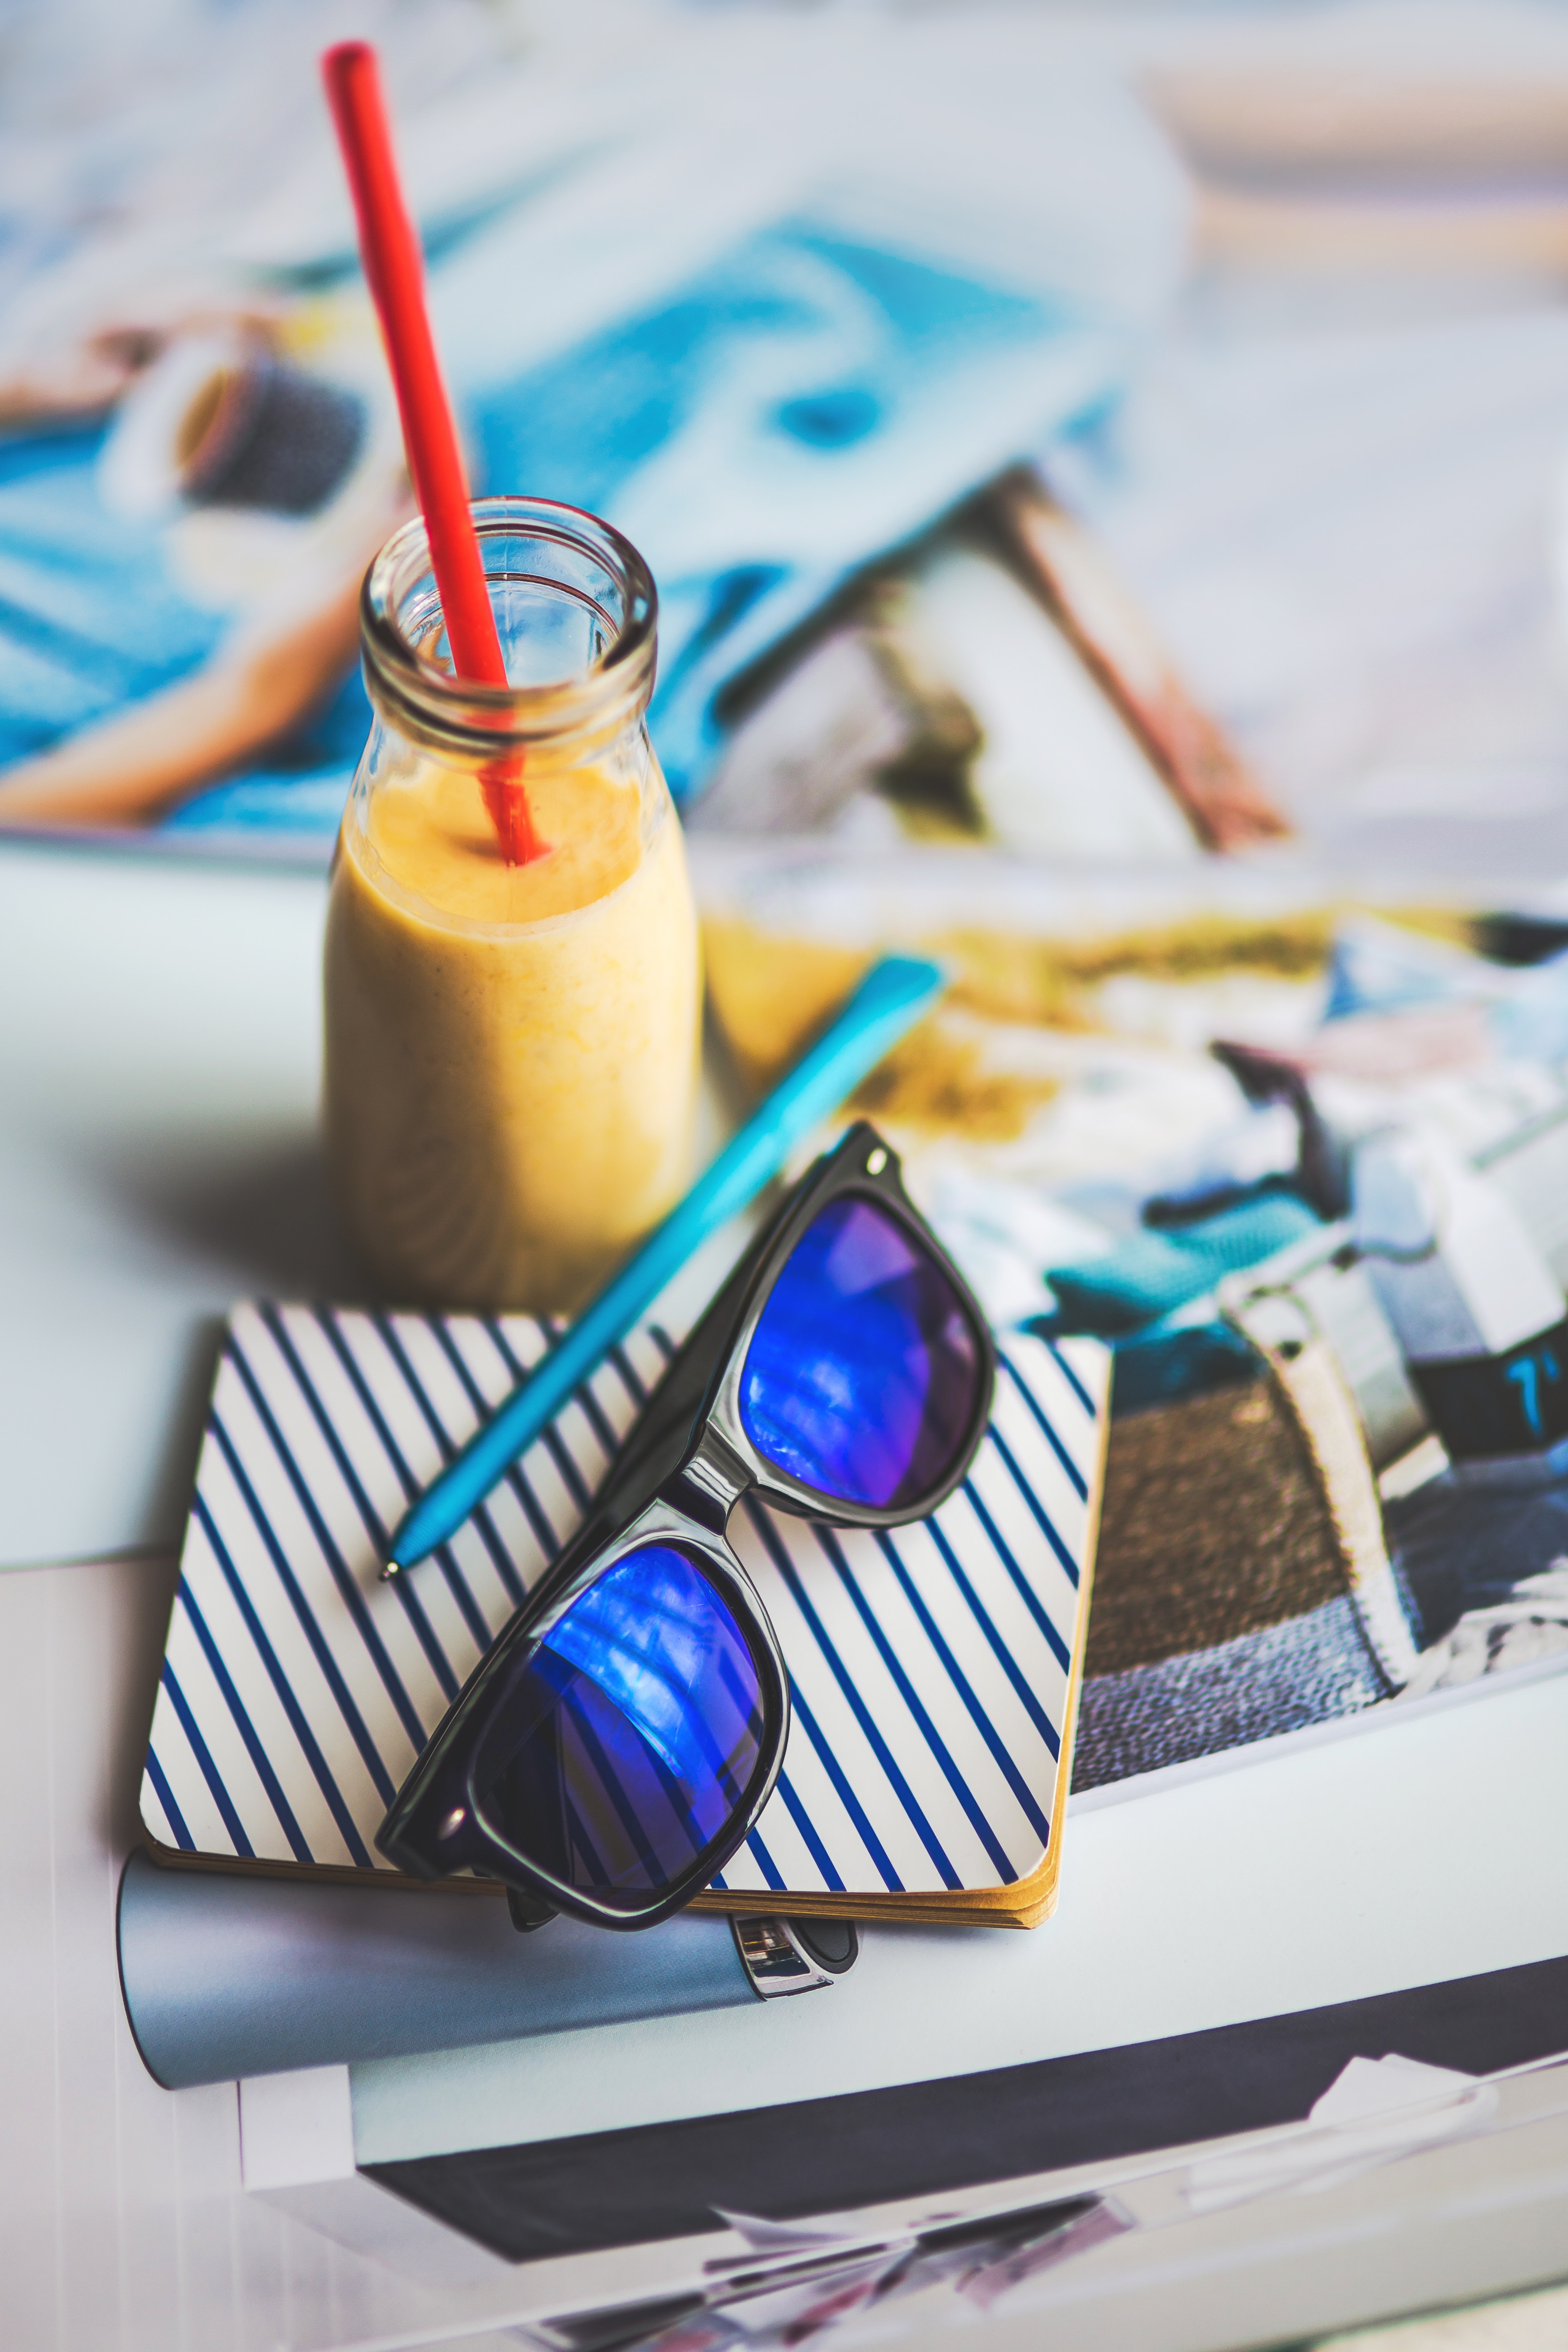 Sunglasses, yougurt, note, Office, Wood, Technology, Table, HQ Photo